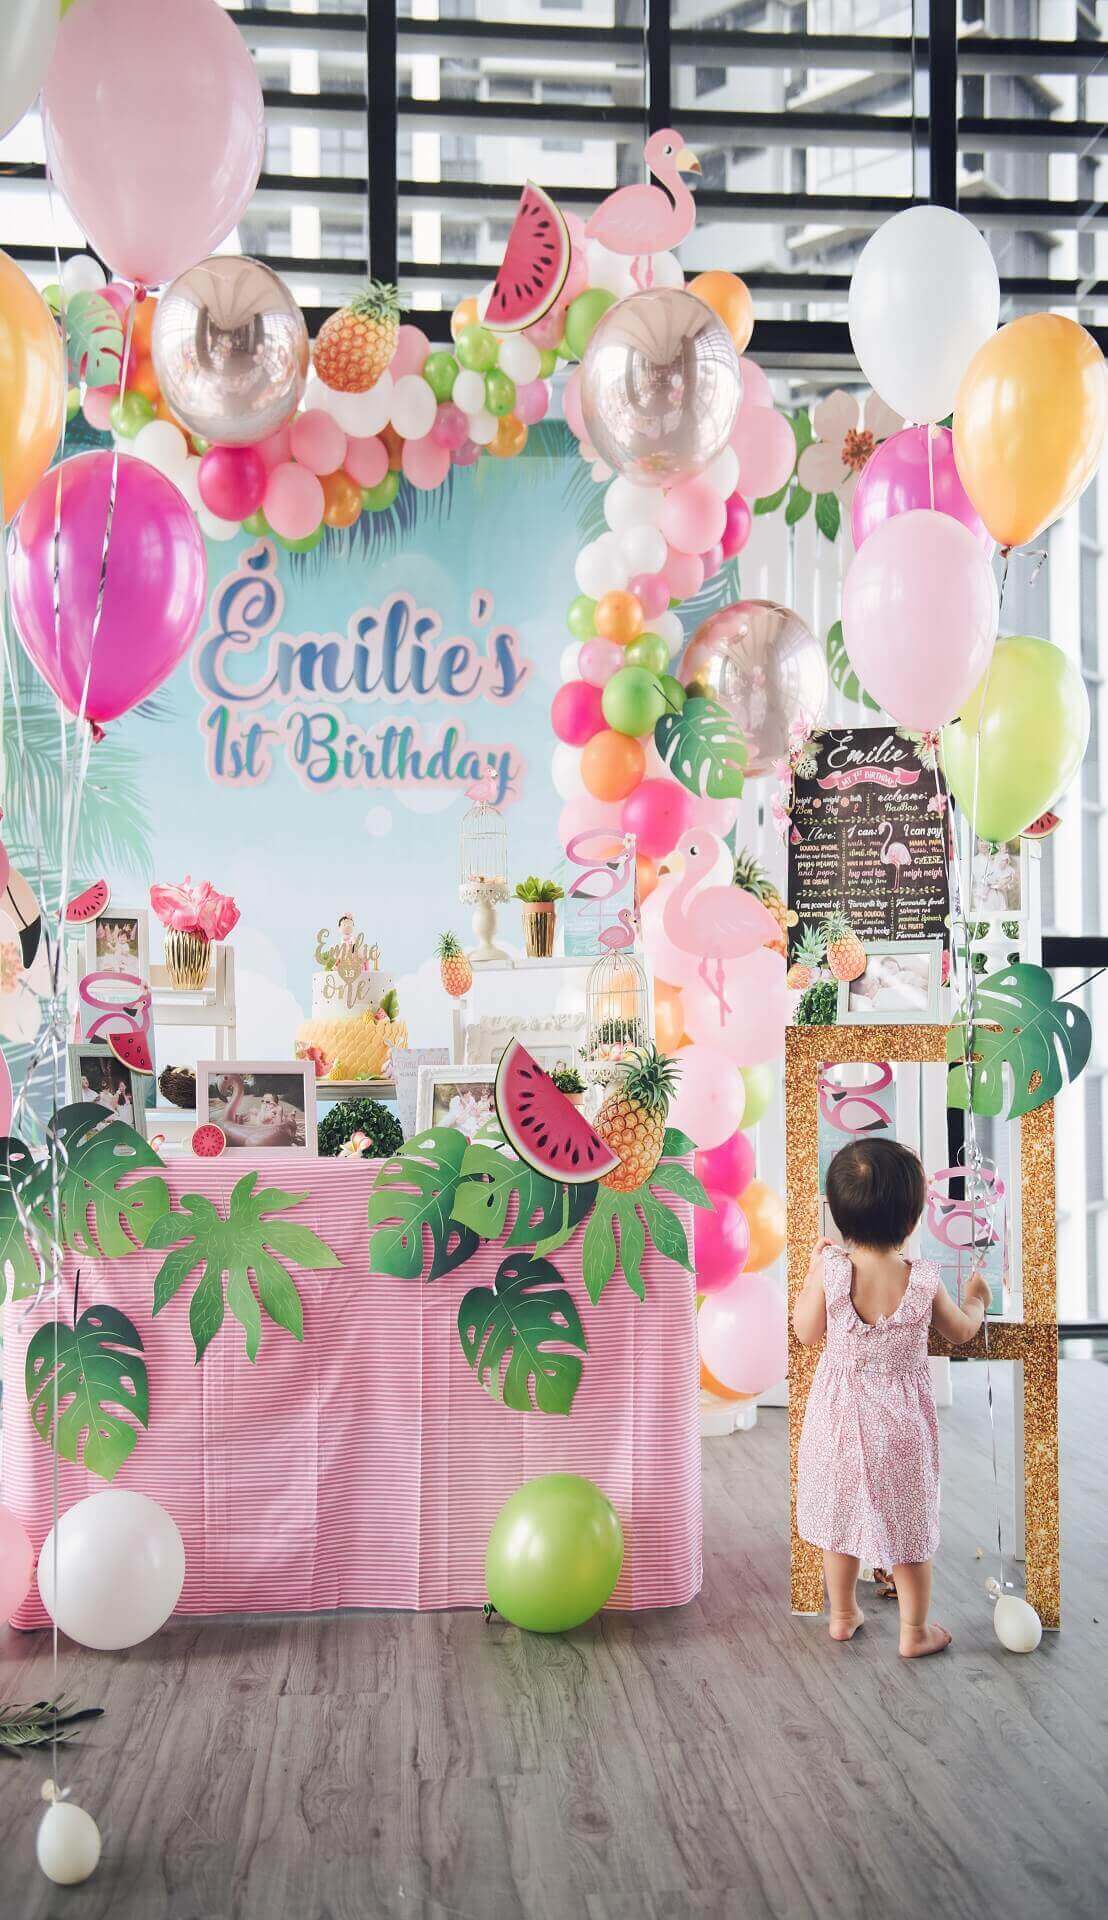 Sugar & Spice Events - Birthday party decoration display, pink is the colour